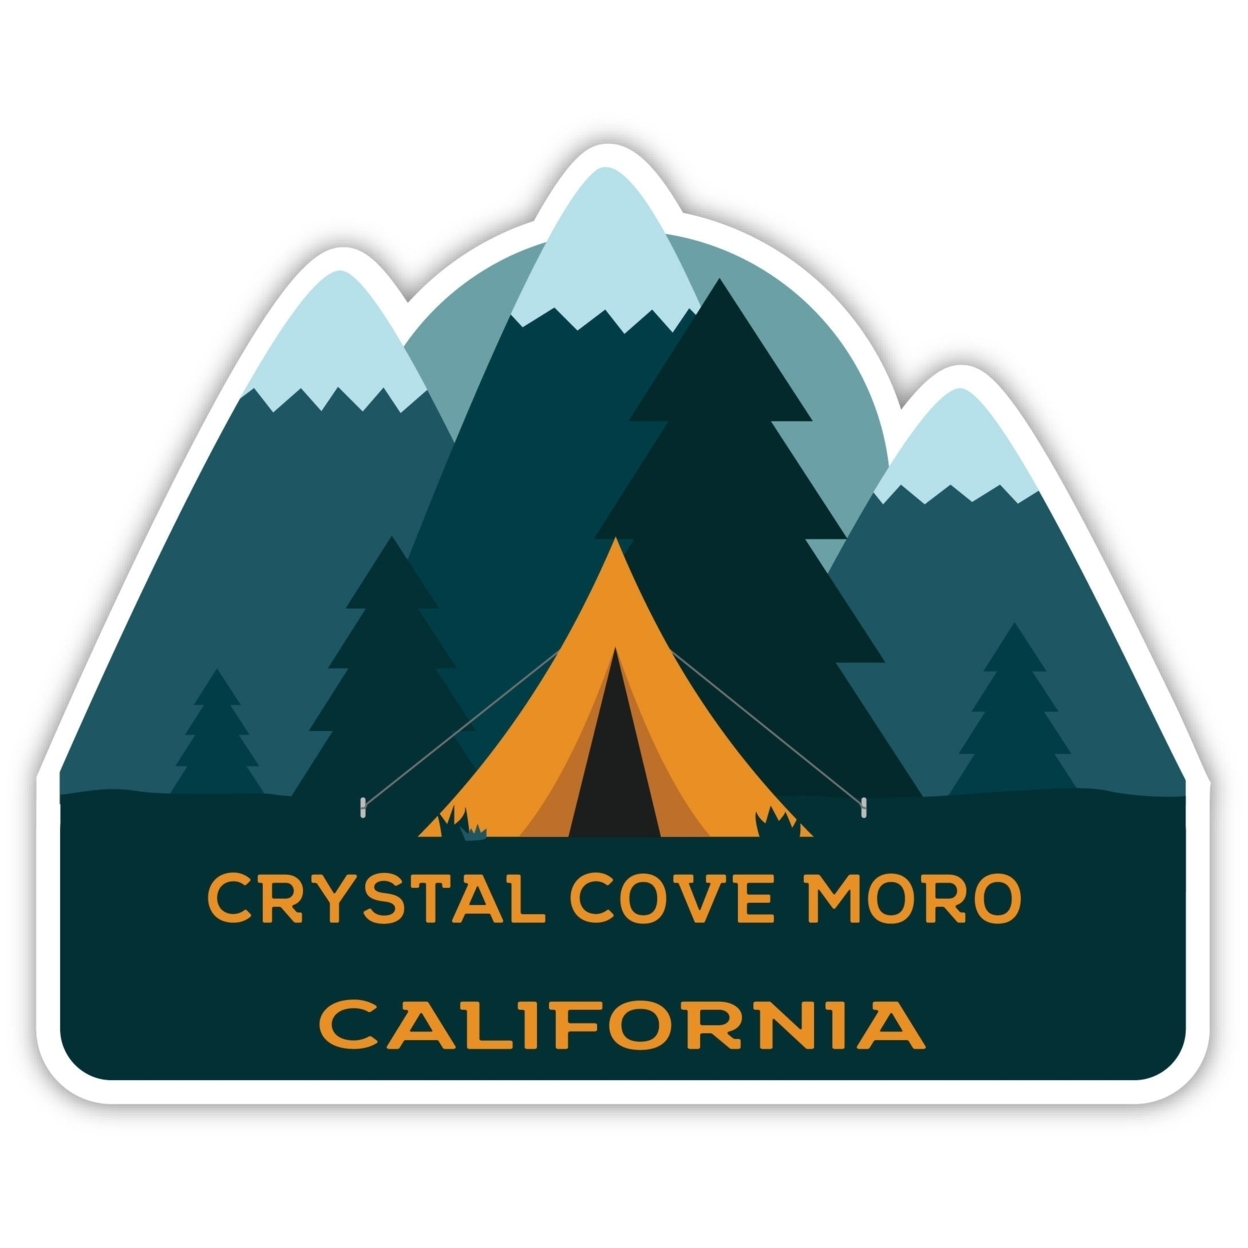 Crystal Cove Moro California Souvenir Decorative Stickers (Choose Theme And Size) - 4-Pack, 4-Inch, Tent